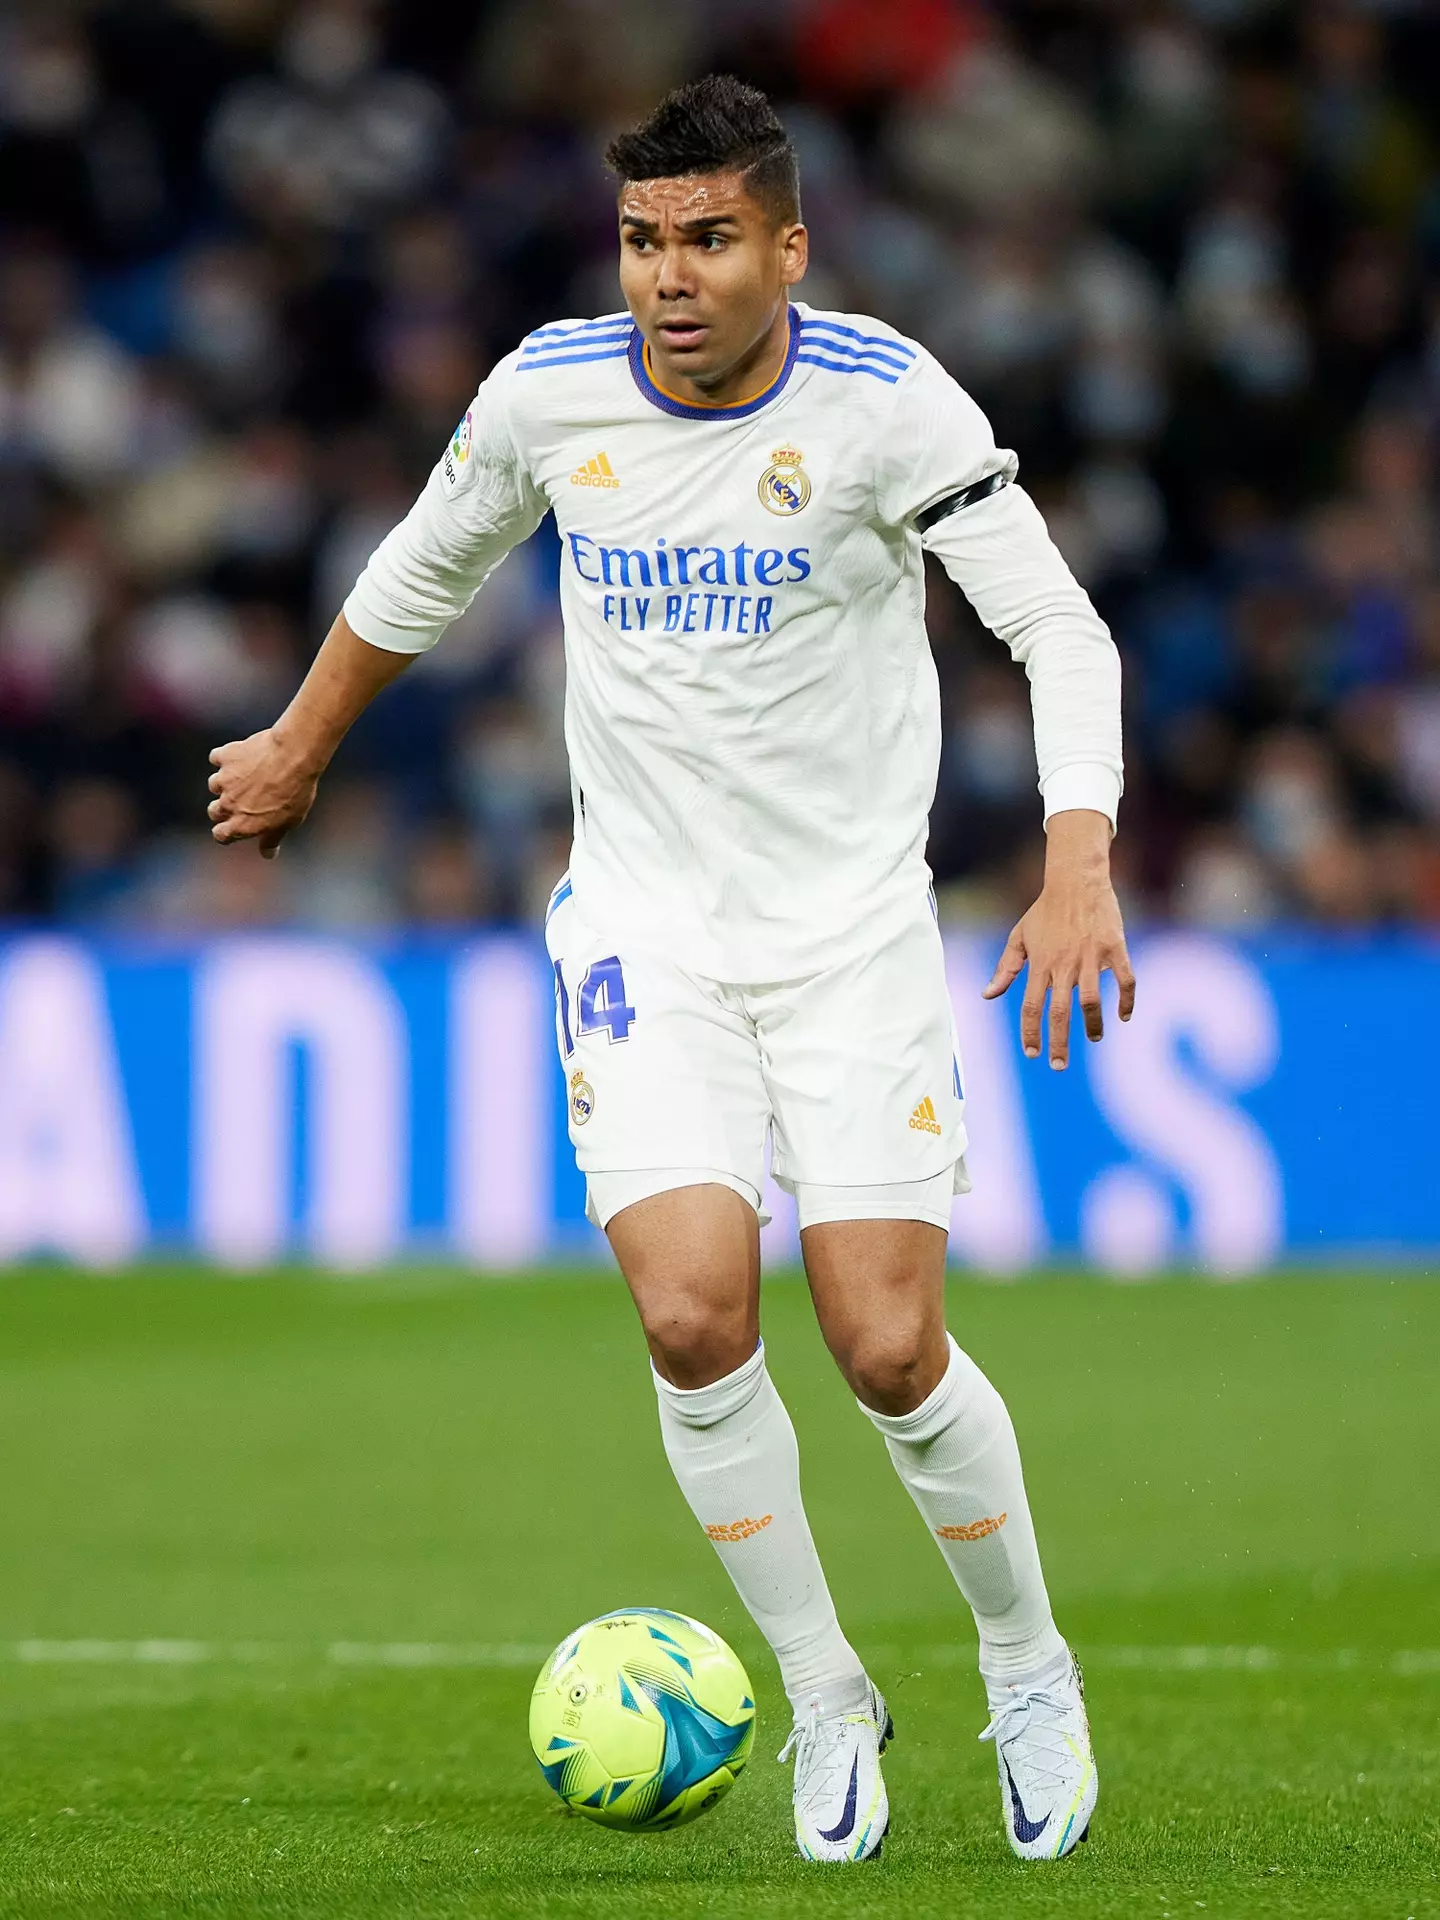 Real Madrid's Casemiro is second on the list (Image: PA)